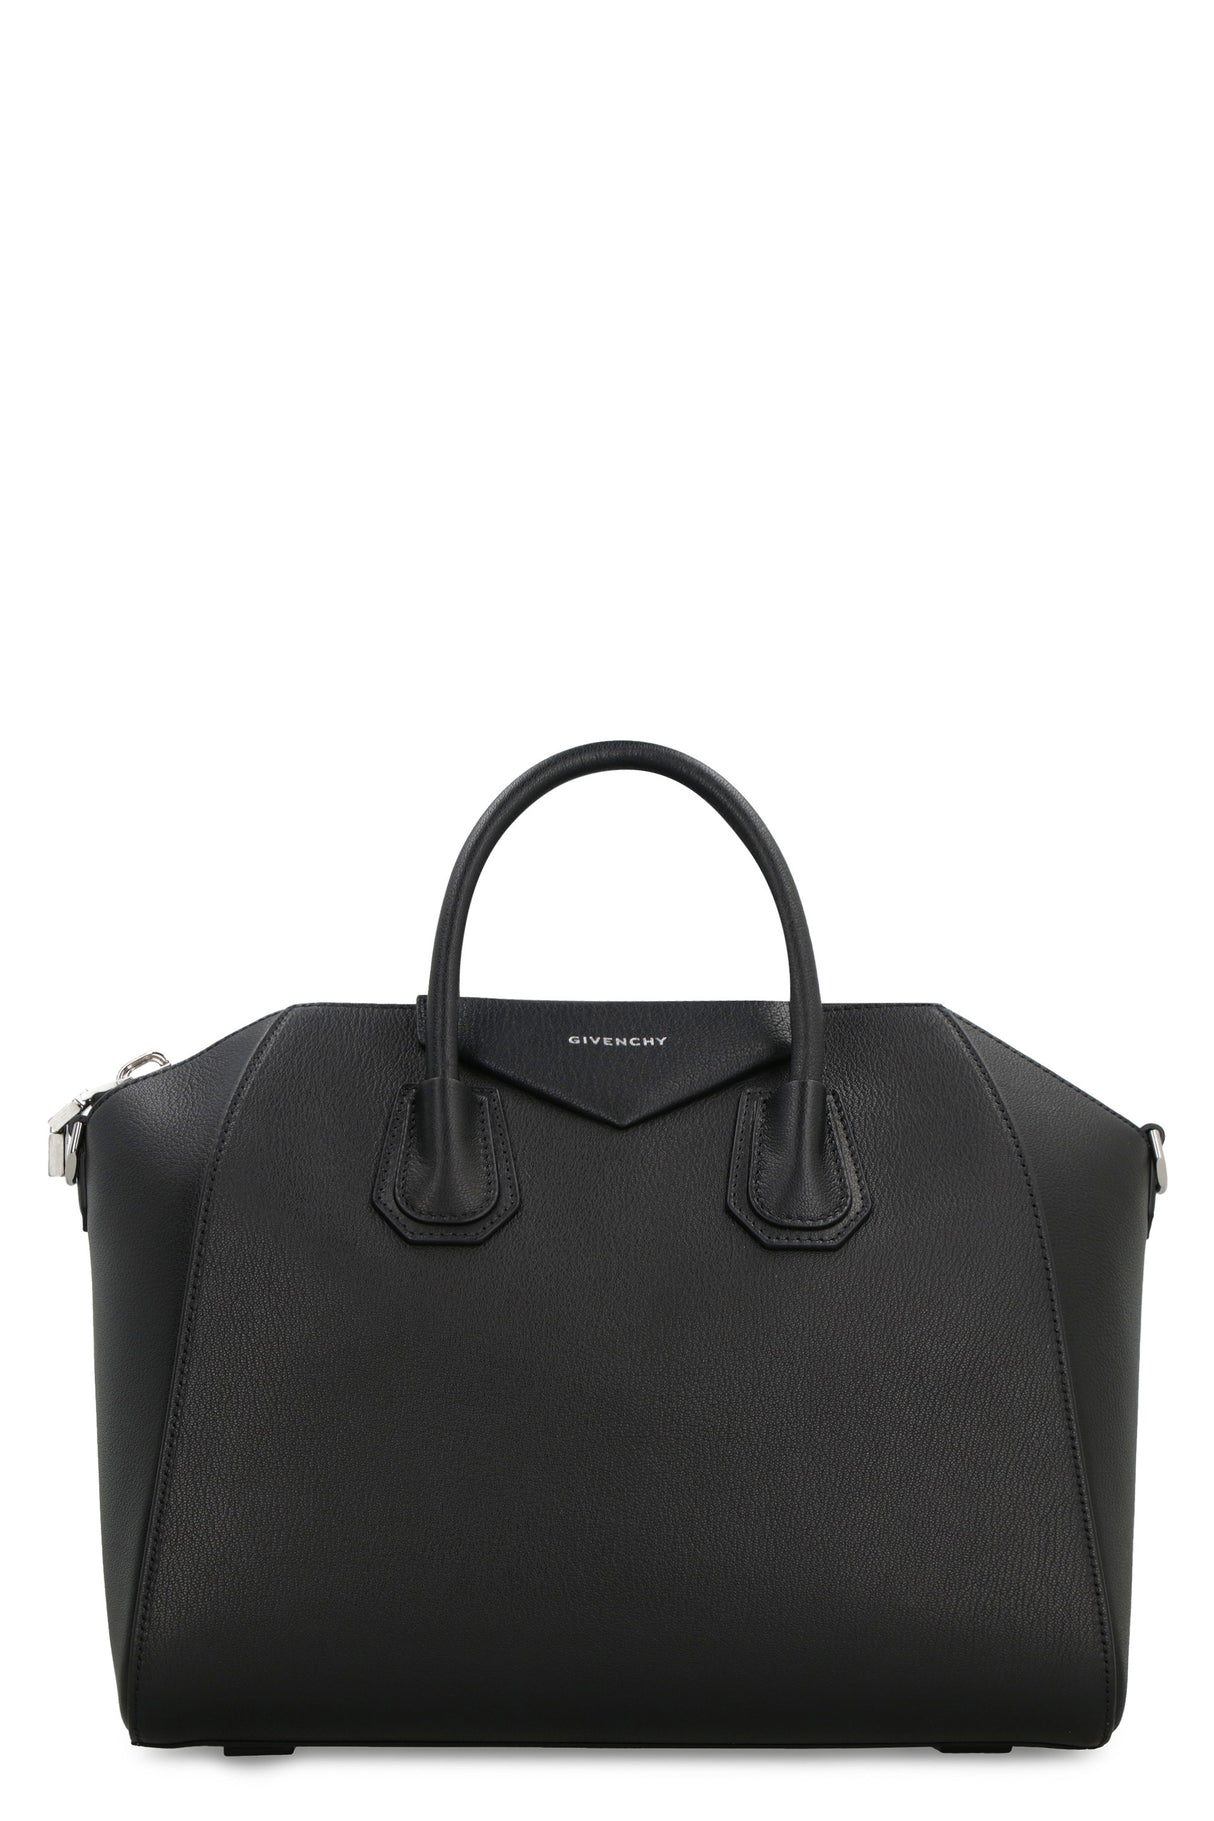 GIVENCHY Classic Black Leather Handbag for Women - Top Zippered Closure, Removable Shoulder Strap, and Silver-Tone Hardware